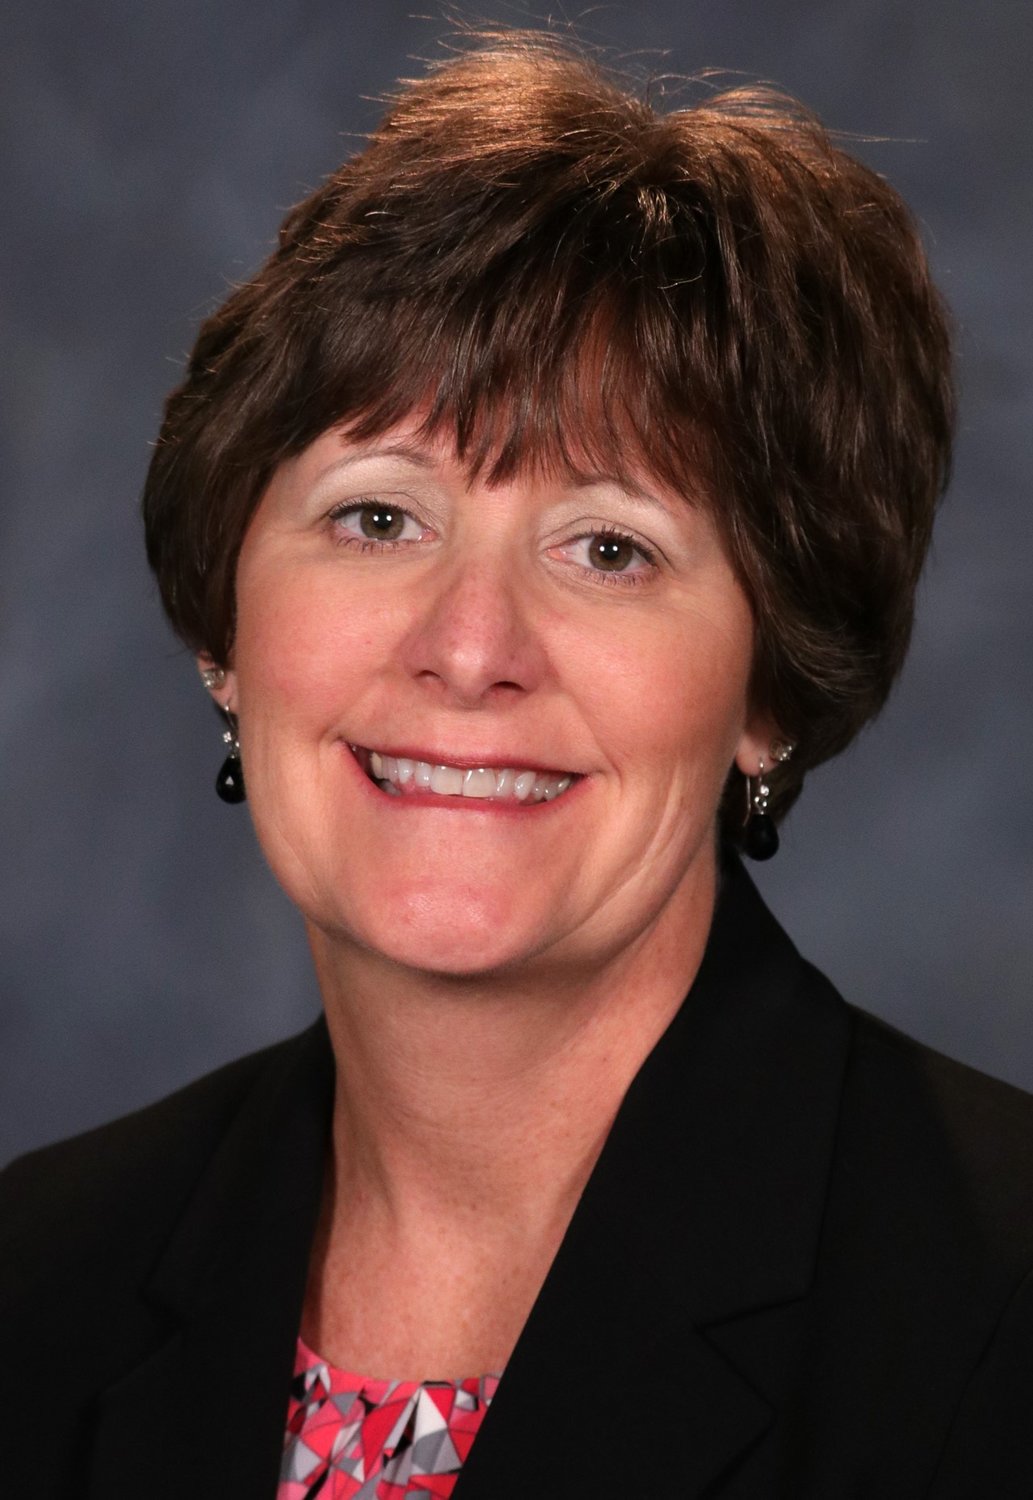 Amy Cannon was the first woman to serve as Cumberland County manager.